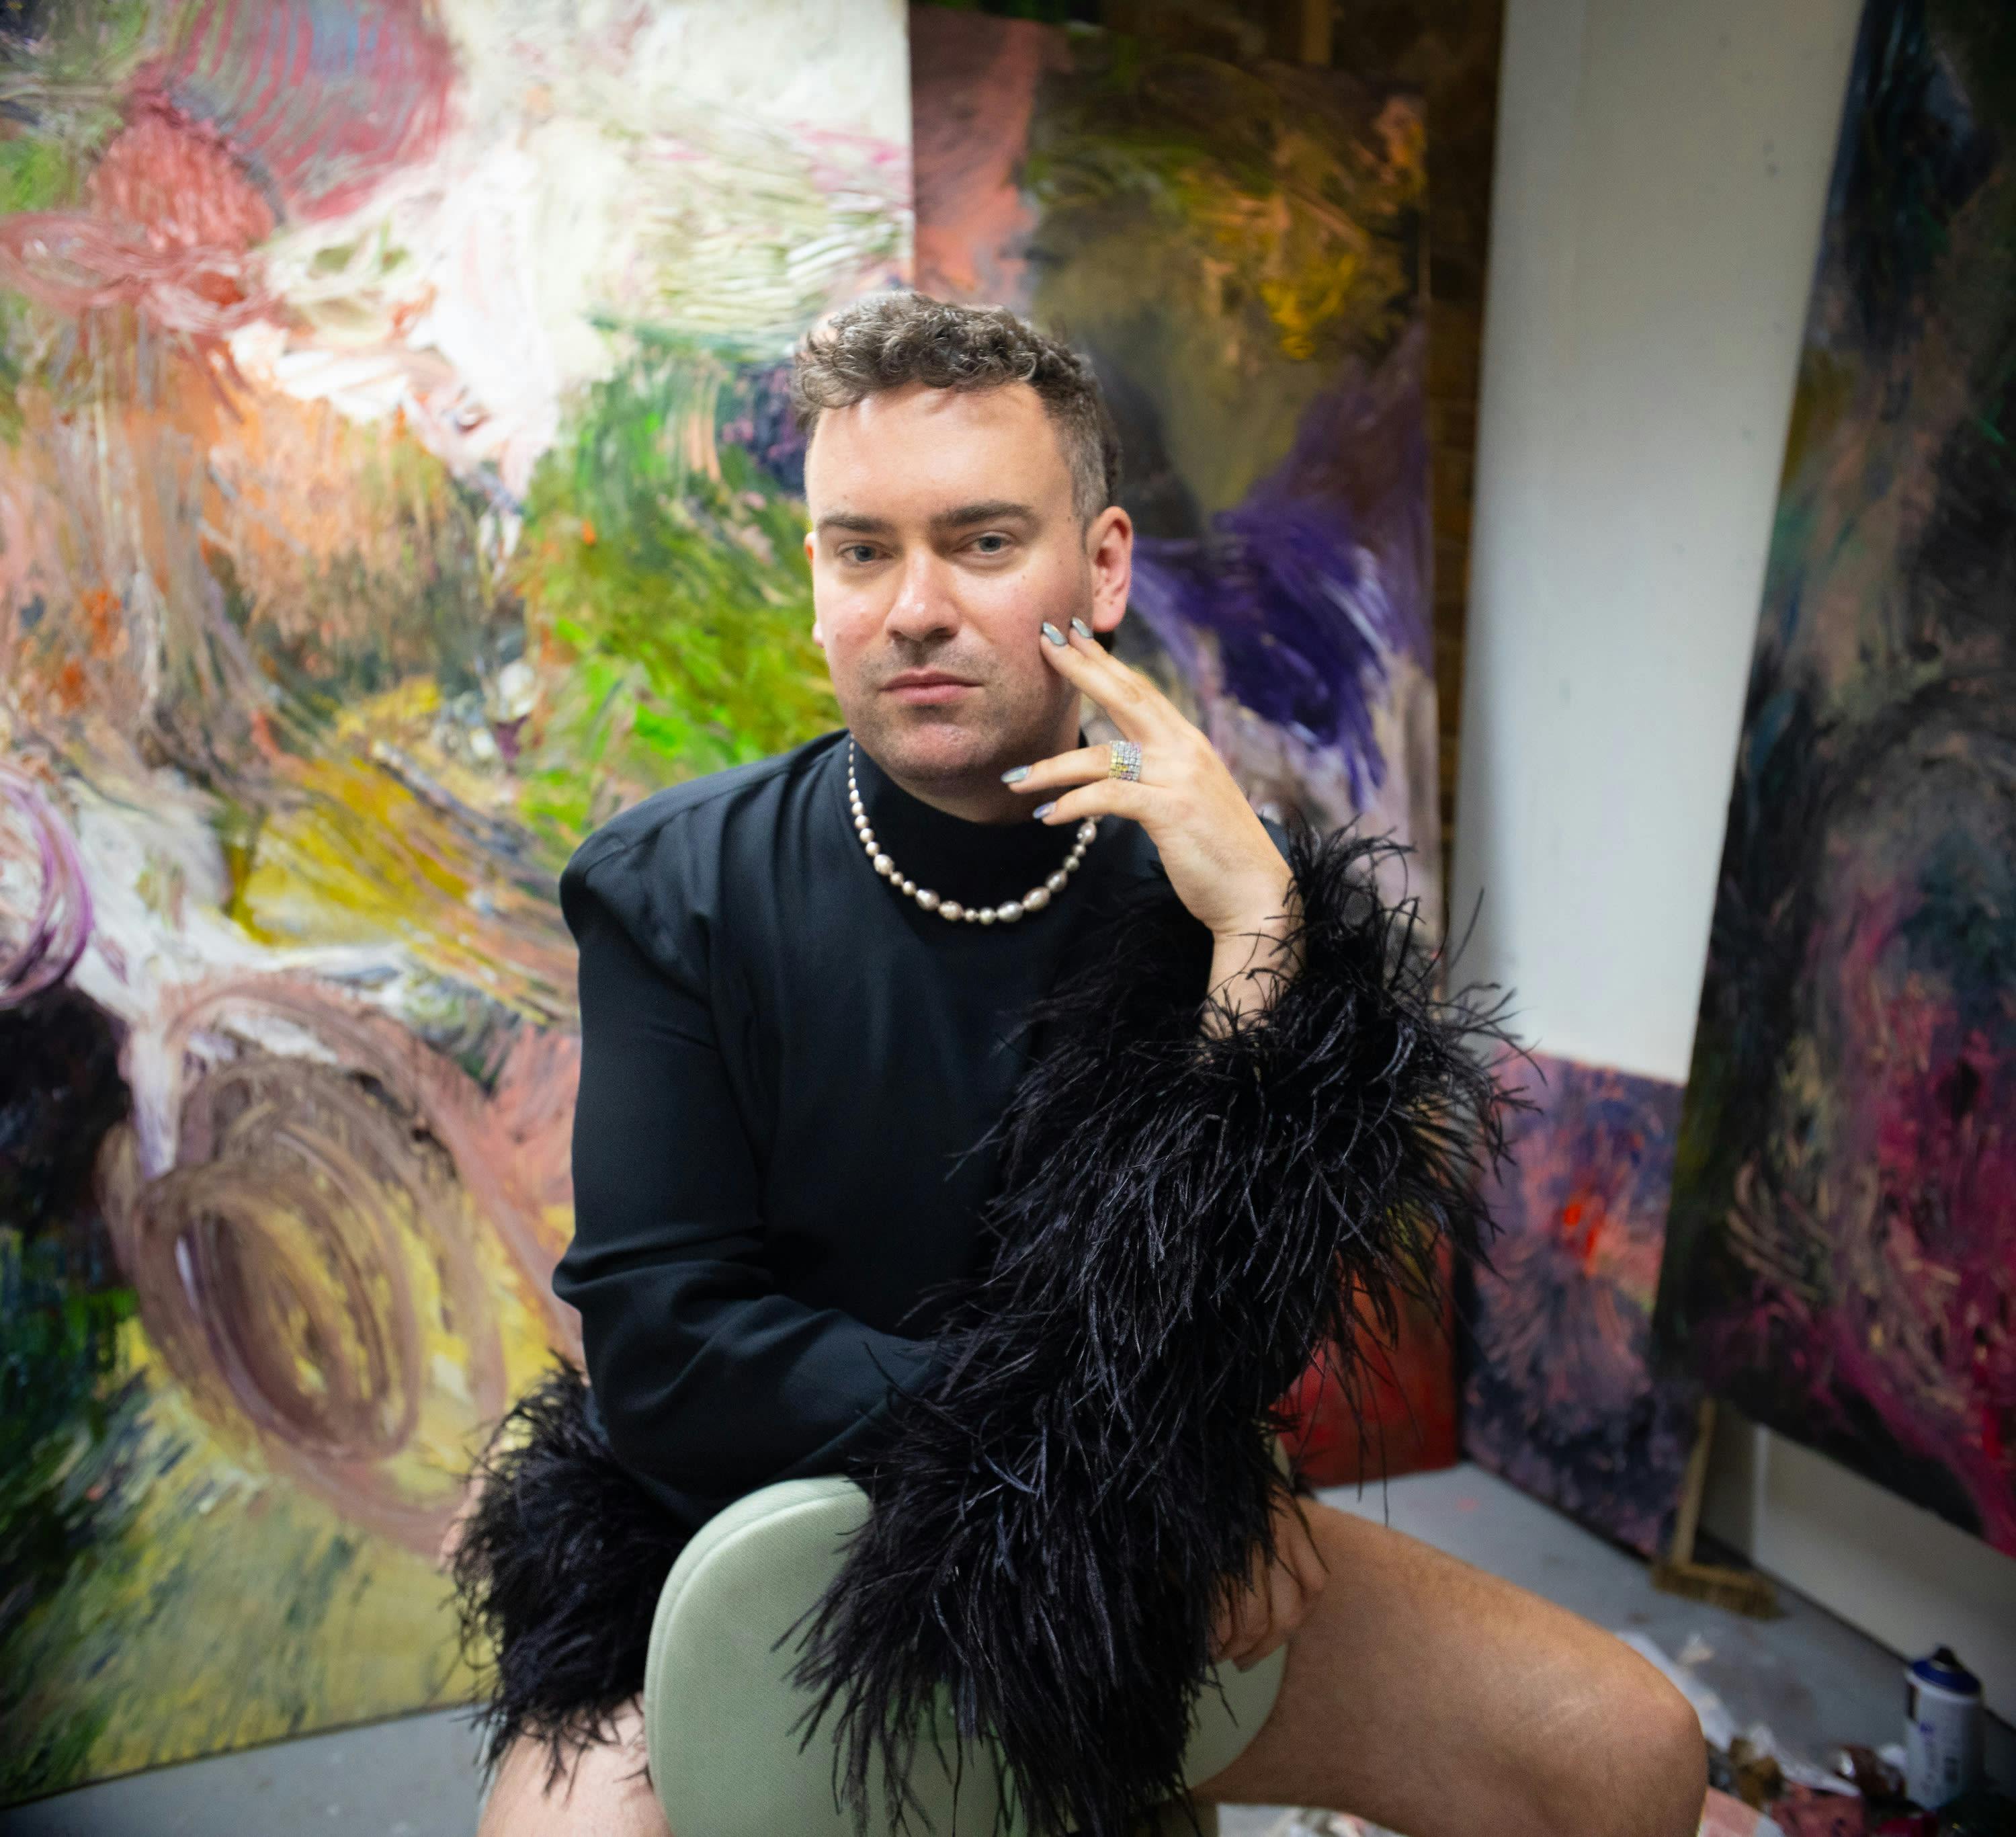 A portrait of James Cabaniuk with thick impasto abstract paintings behind them